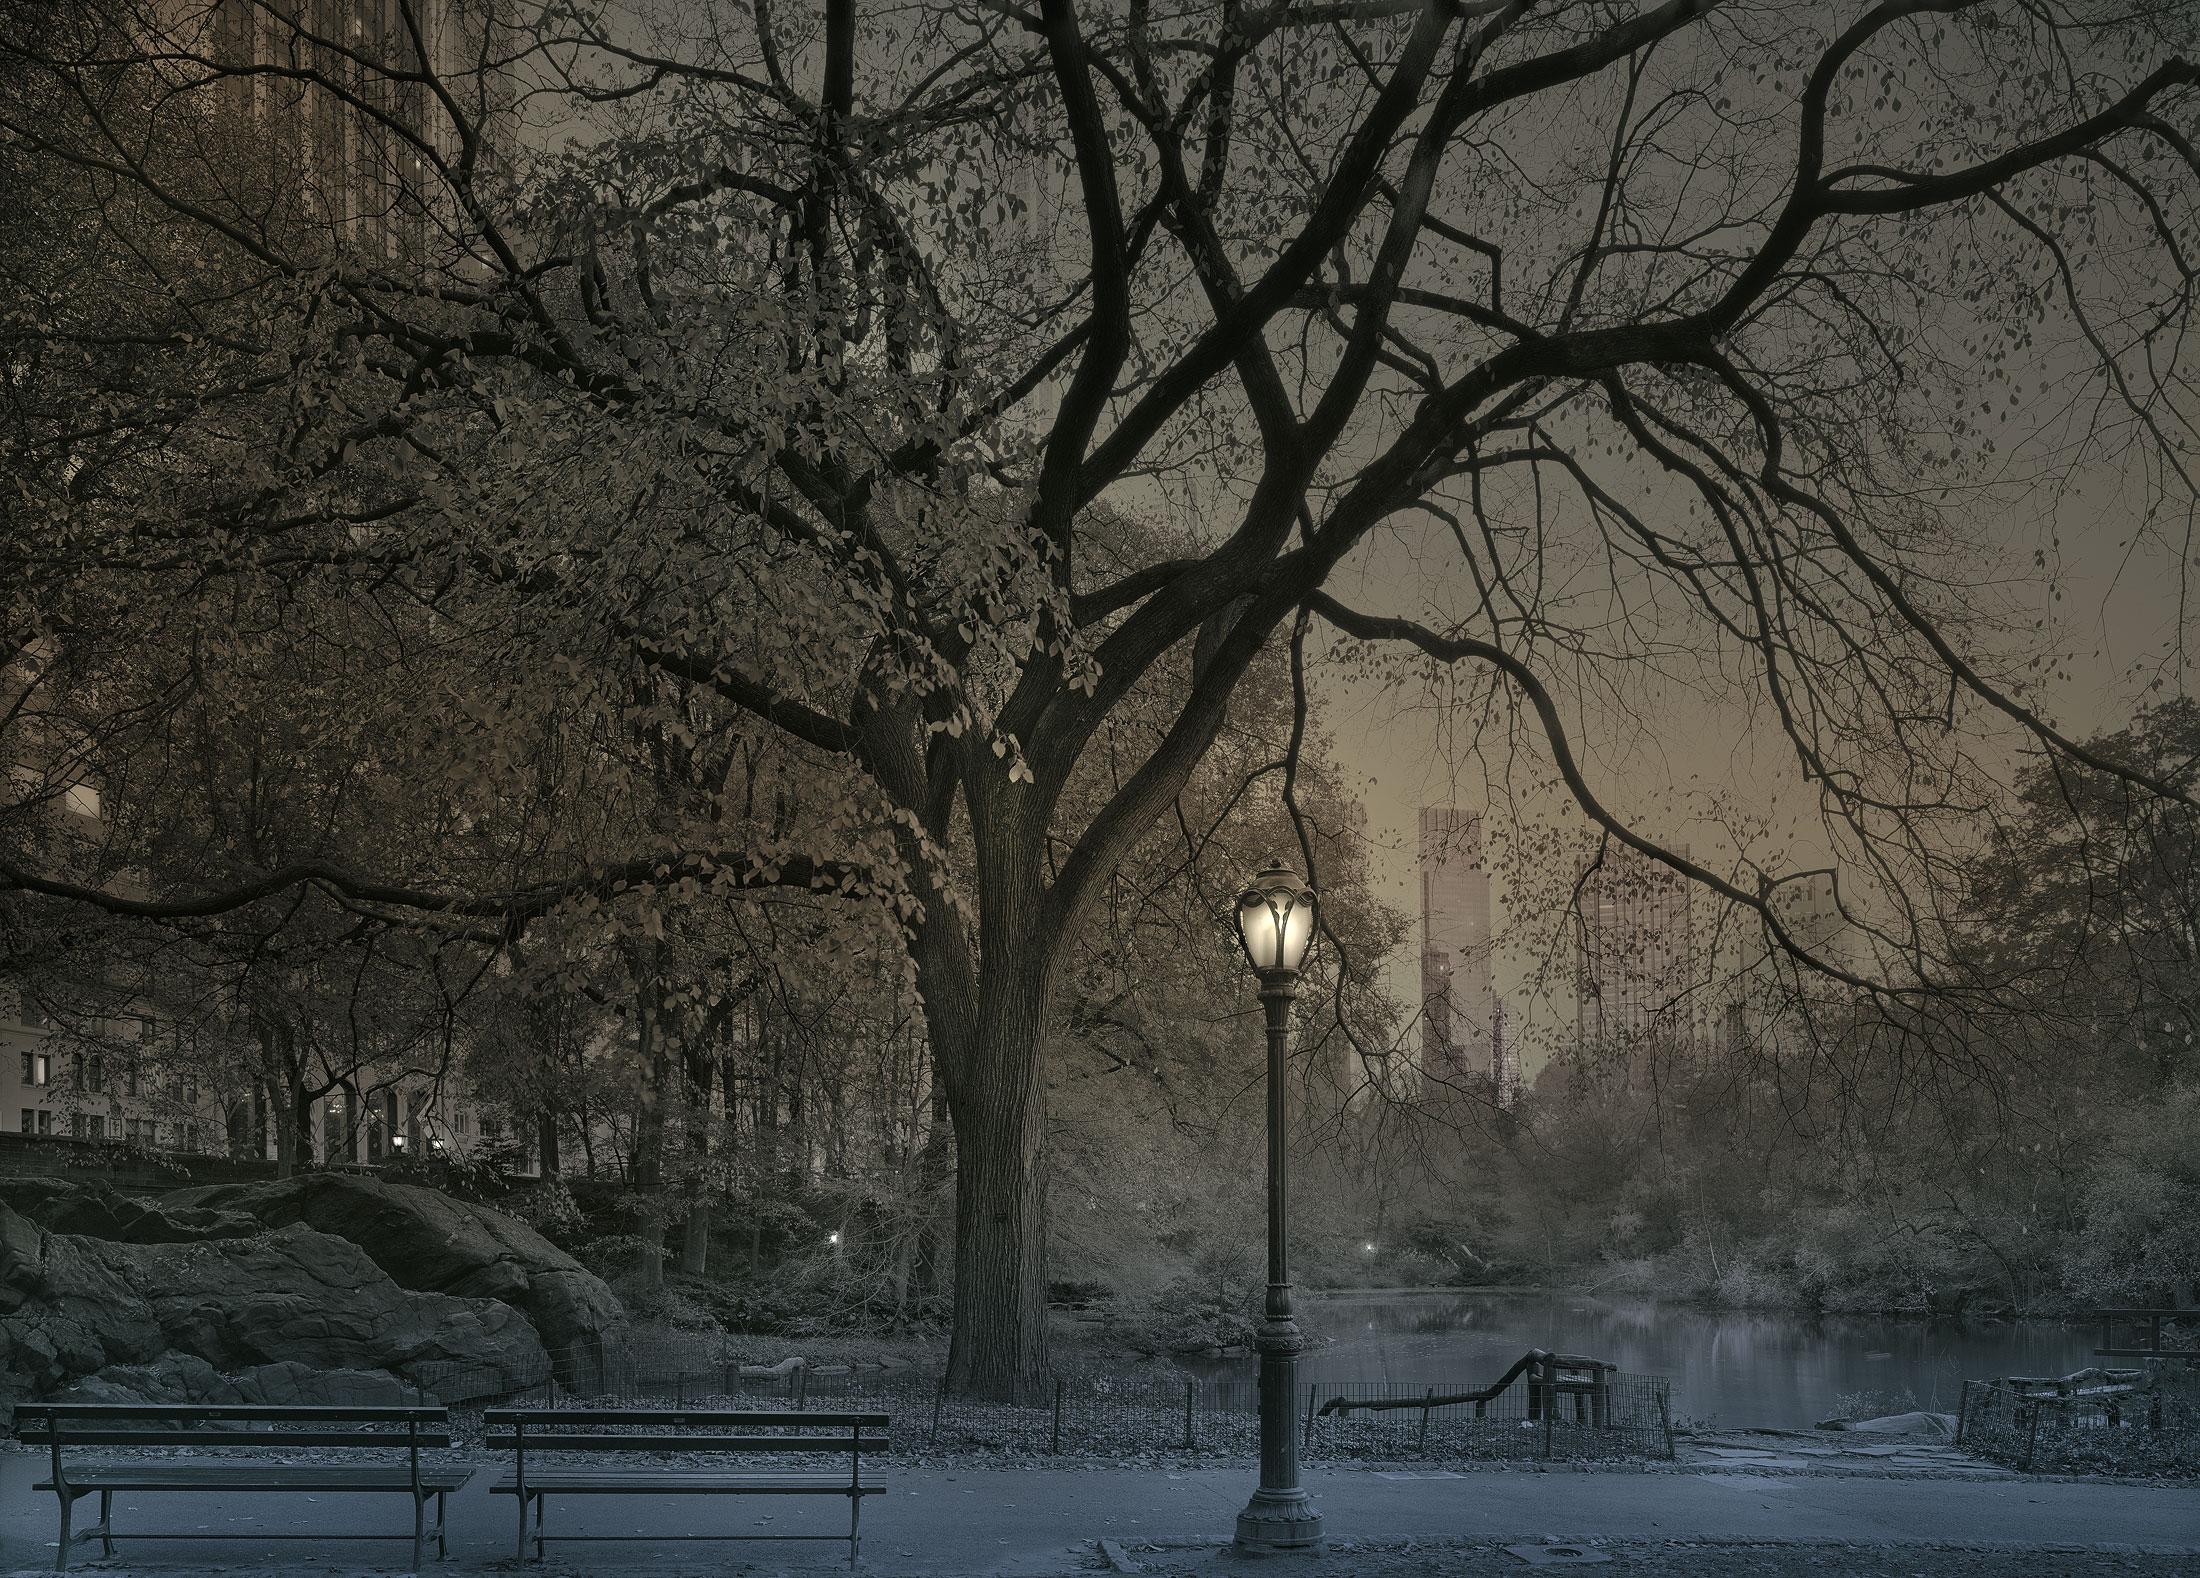 Series: Deep In A Dream-Central Park

Print Type: Selenium, Sepia, & Iron Toned Gelatin Silver 
Printed on Bergger Prestige Fiber Based Paper
Matted & Mounted 8ply Museum Board

Available Sizes:
22" x 28"	Edition of 20 + 3 AP
32" x 40"	Edition of 10